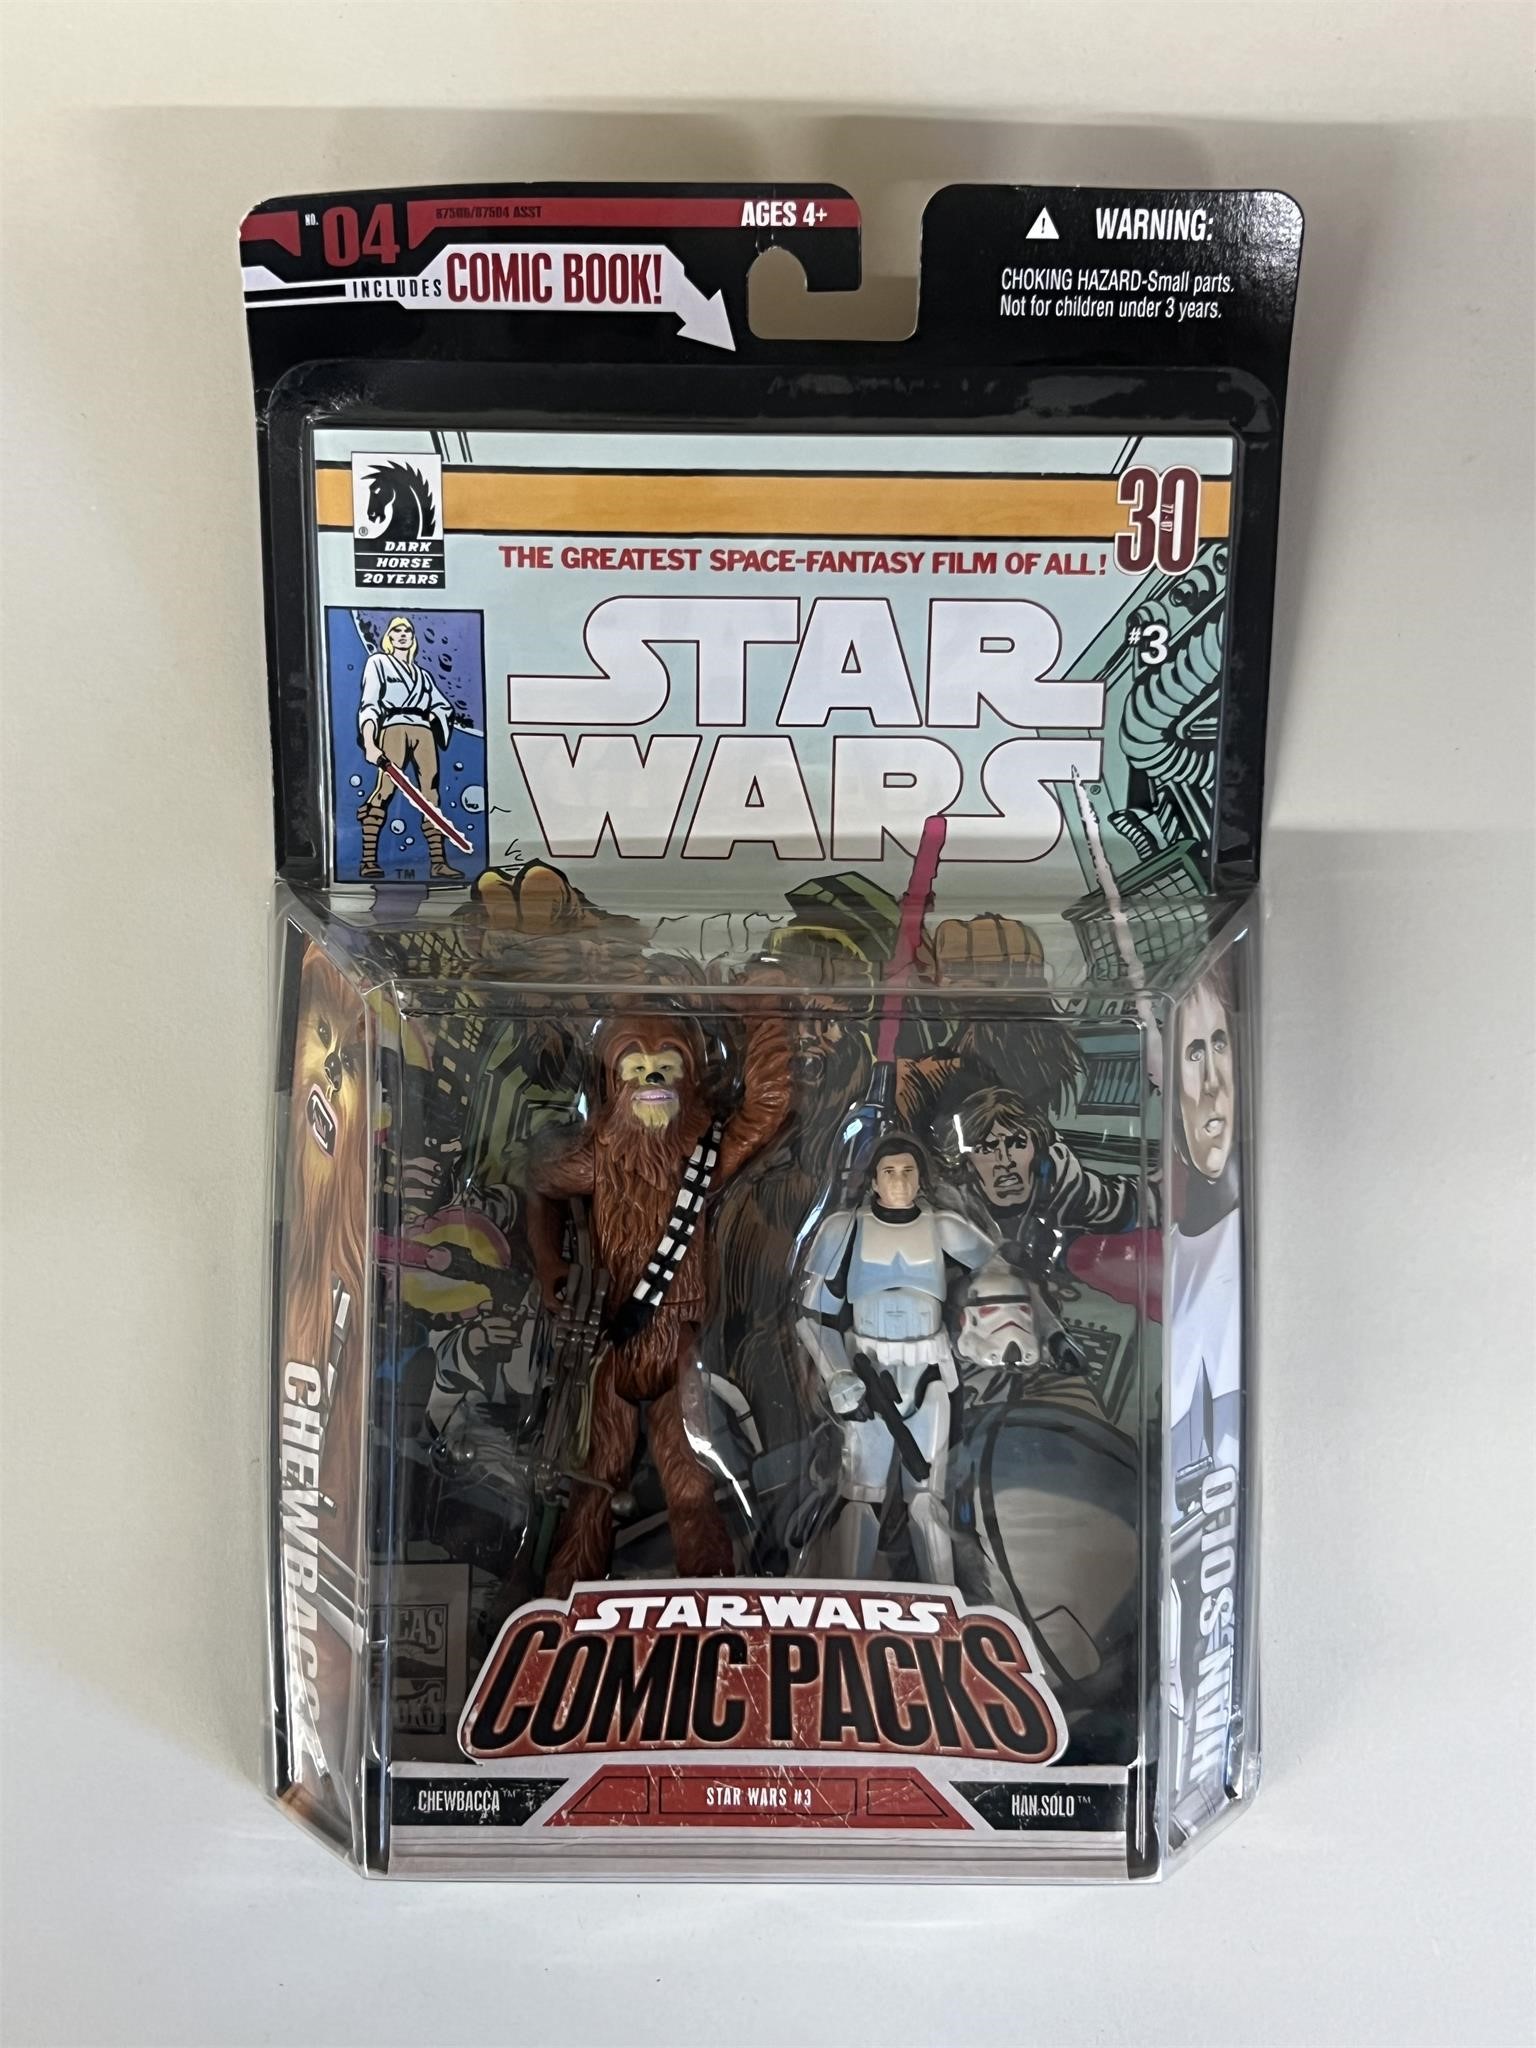 Star Wars 30th Anniversary Comic with Figures